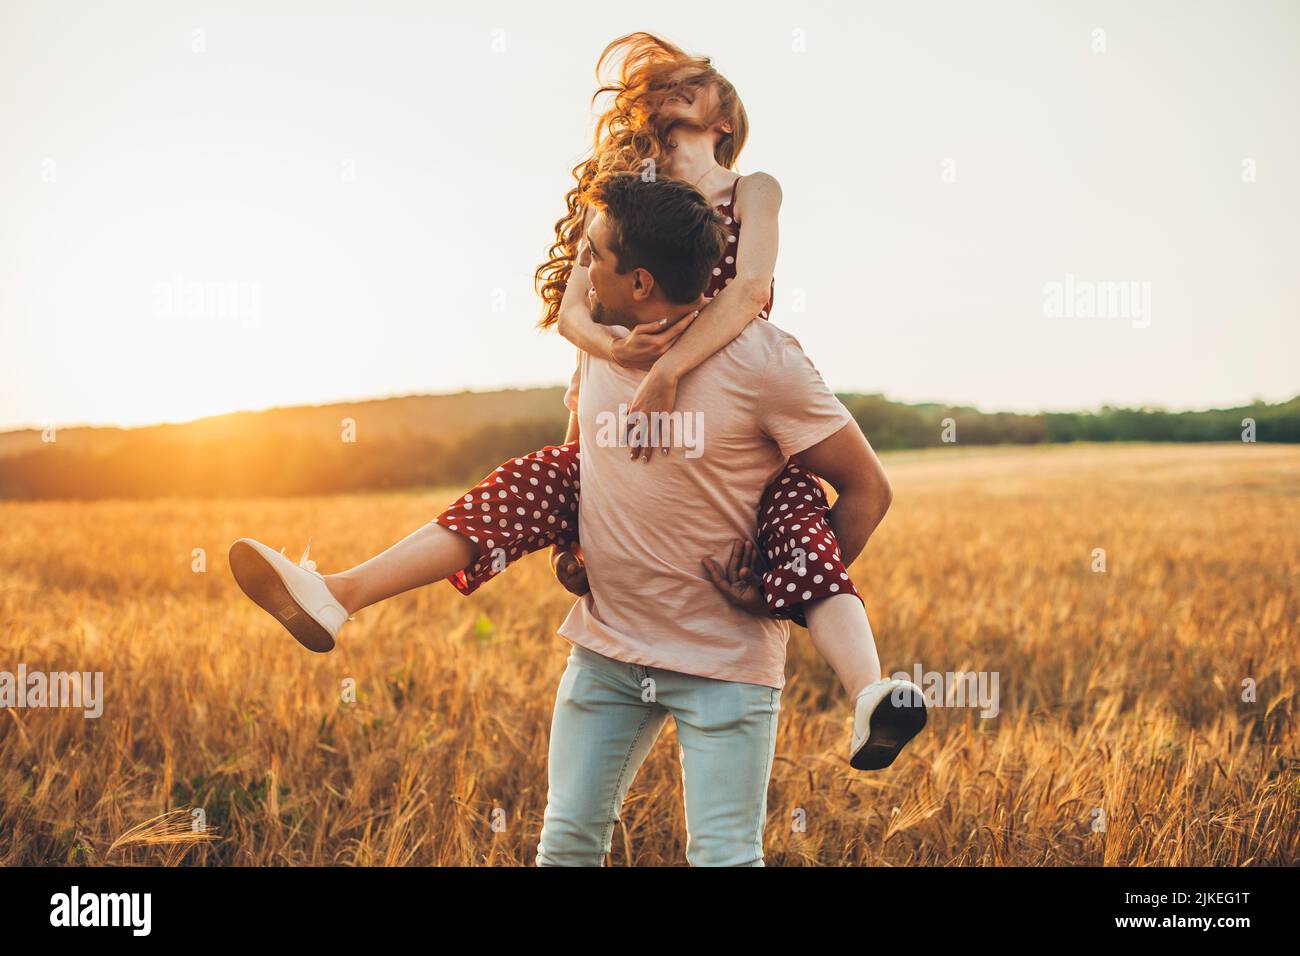 Attractive caucasian couple enjoying a day in a colorful yellow wheat field, man giving the girl a piggy back ride as they smile. Good day, happiness Stock Photo